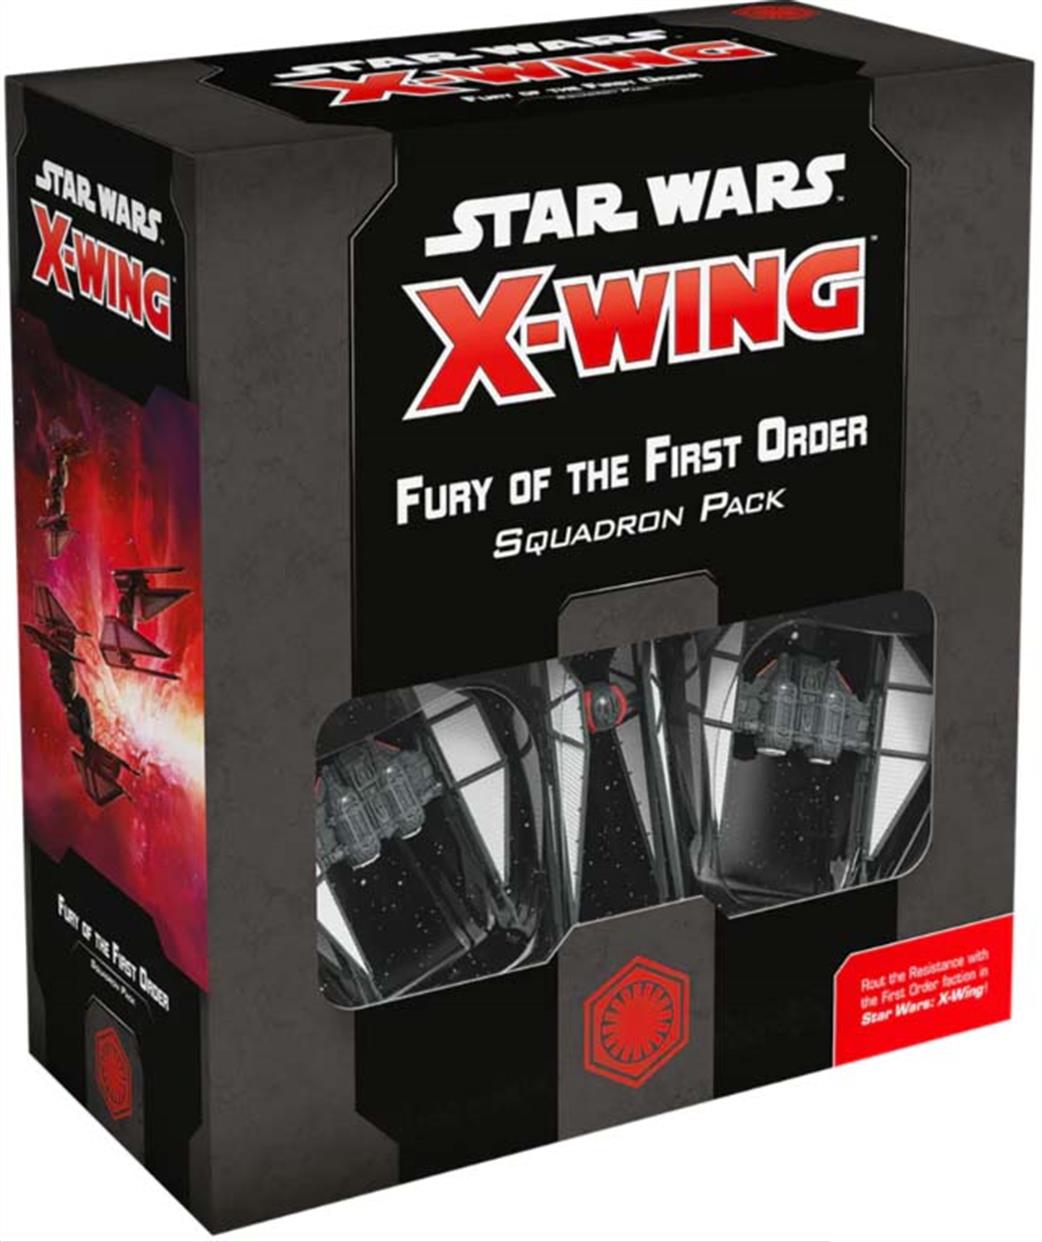 Atomic Mass Games  SWZ87 Fury of the First Order Squadron Pack from Star Wars X-Wing 2nd Ed